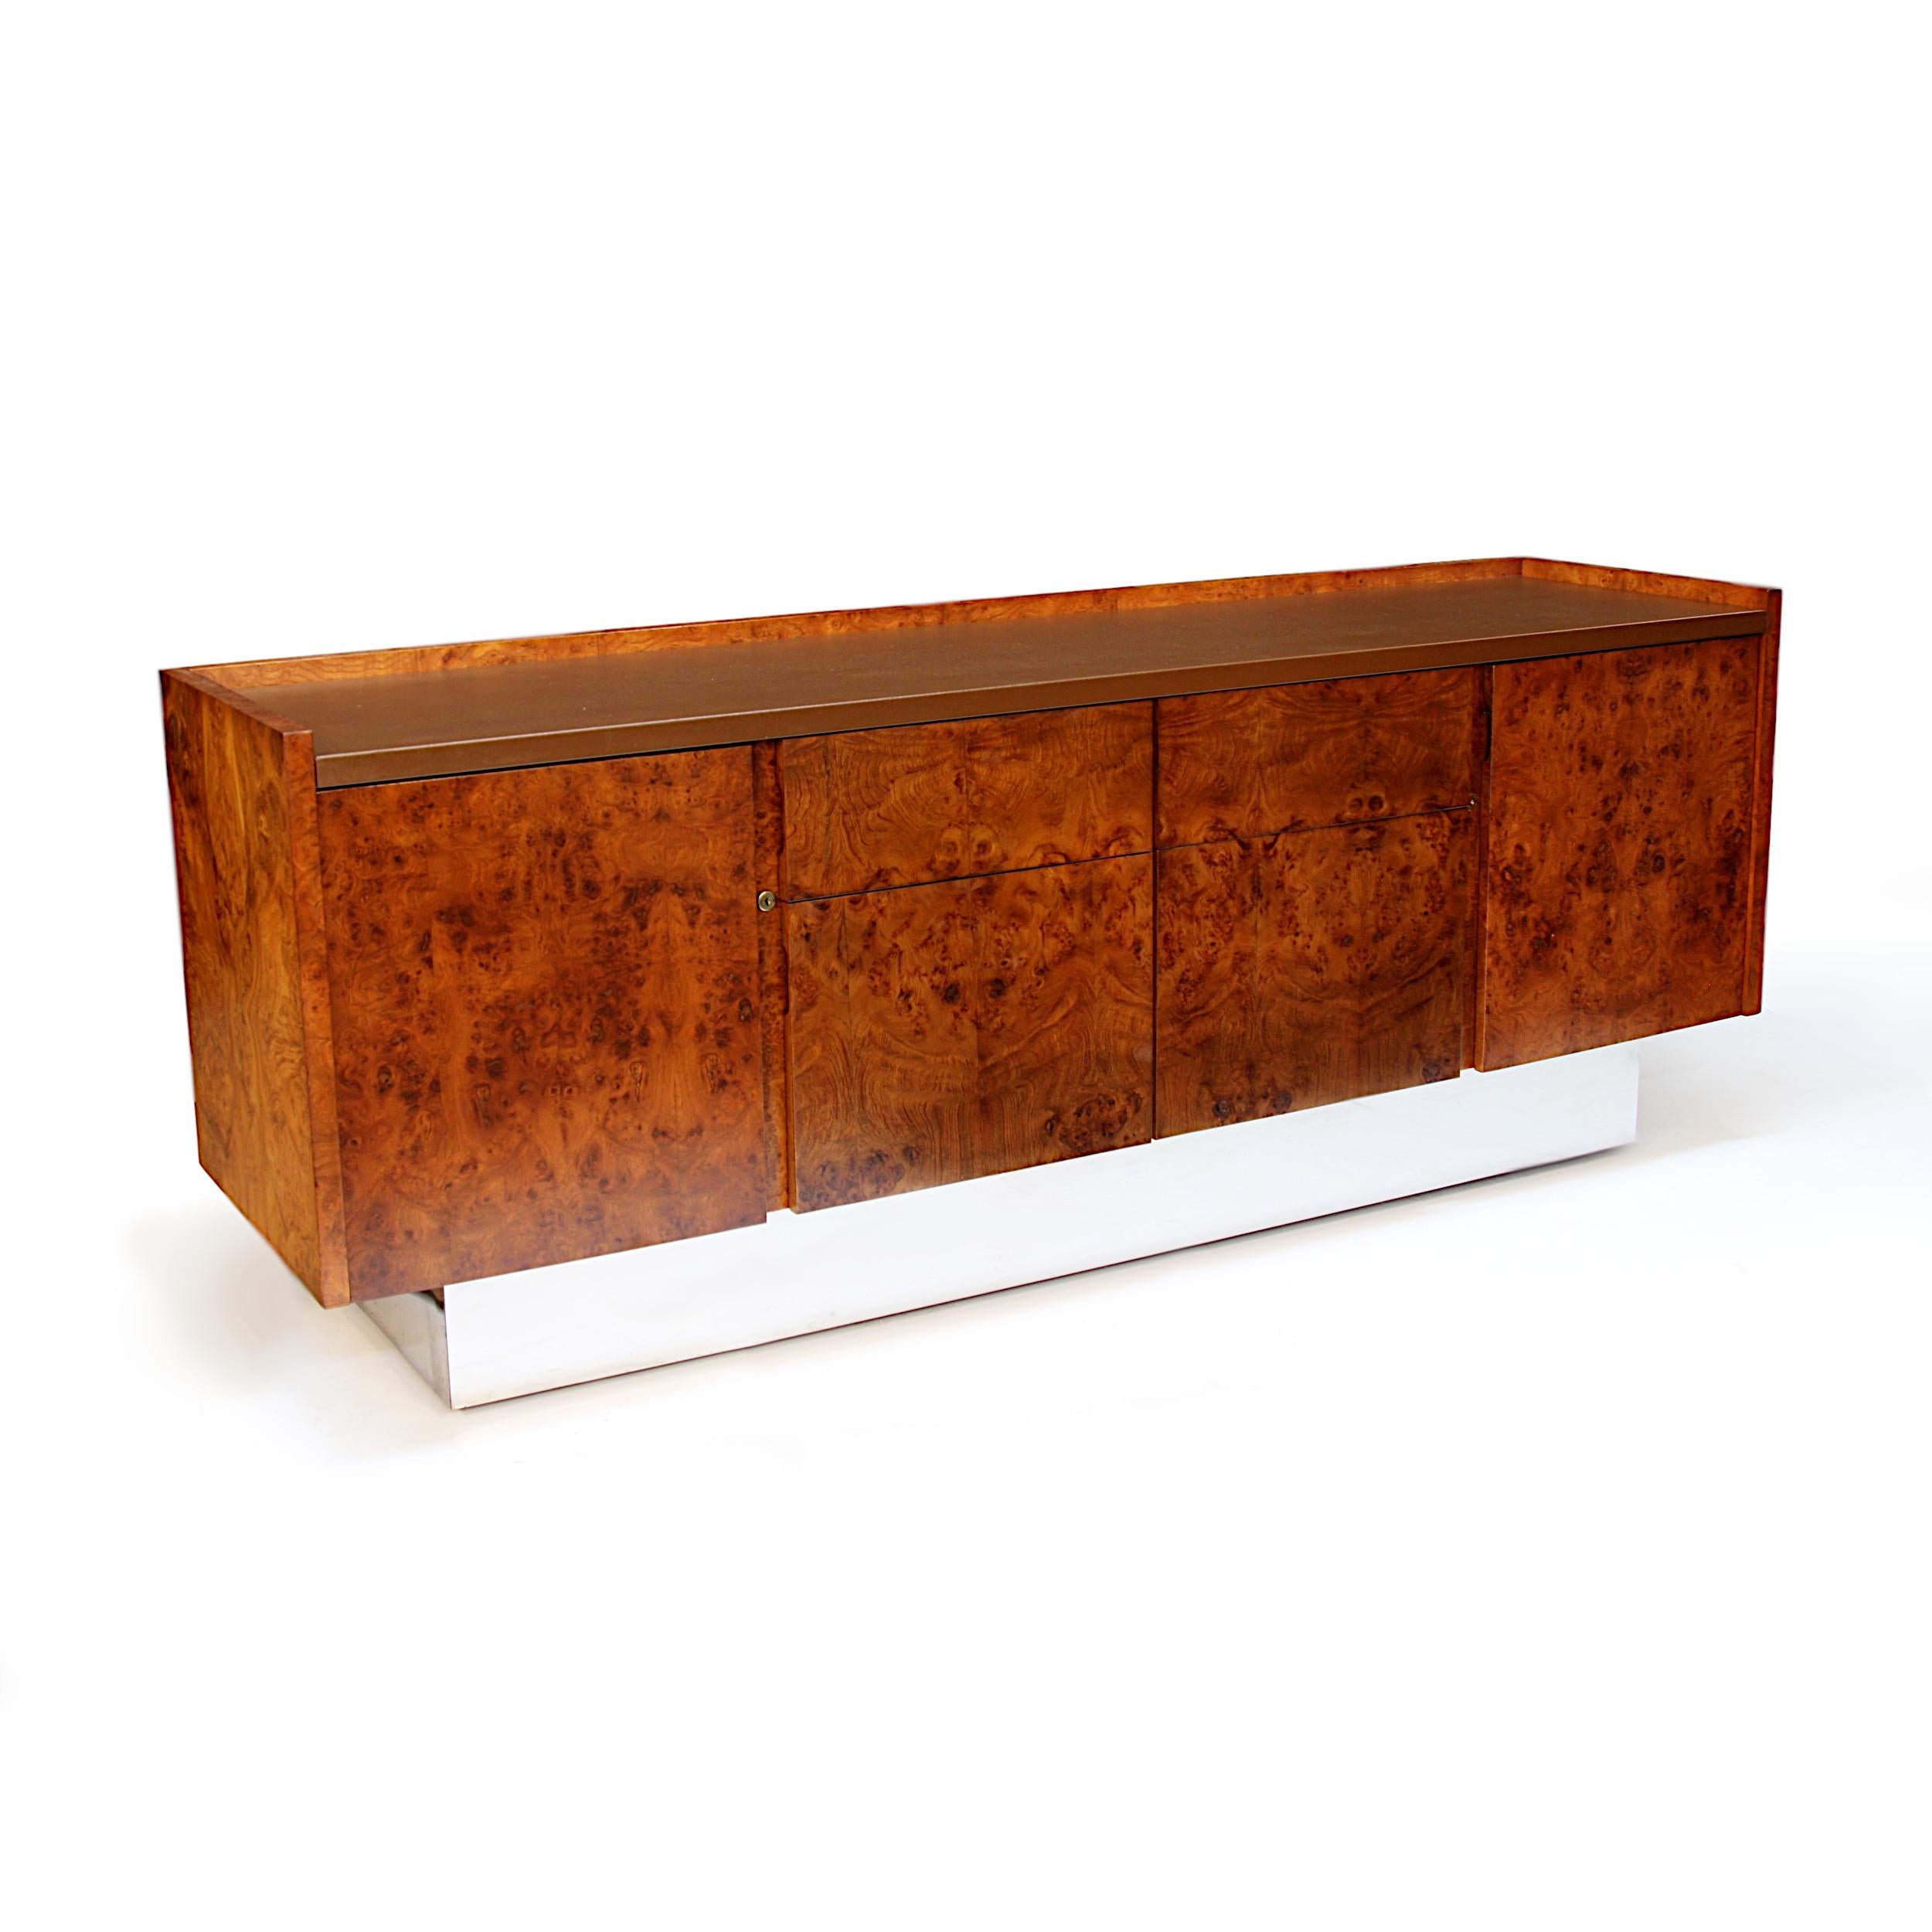 Amazing 1970s executive credenza by Biltrite Furniture Mfg Inc of Montreal, Canada. This sleek, slab-sided, sideboard features gorgeous, book-matched olivewood veneer, Leather writing surface, chrome pedestal base, and a unique Minimalist design